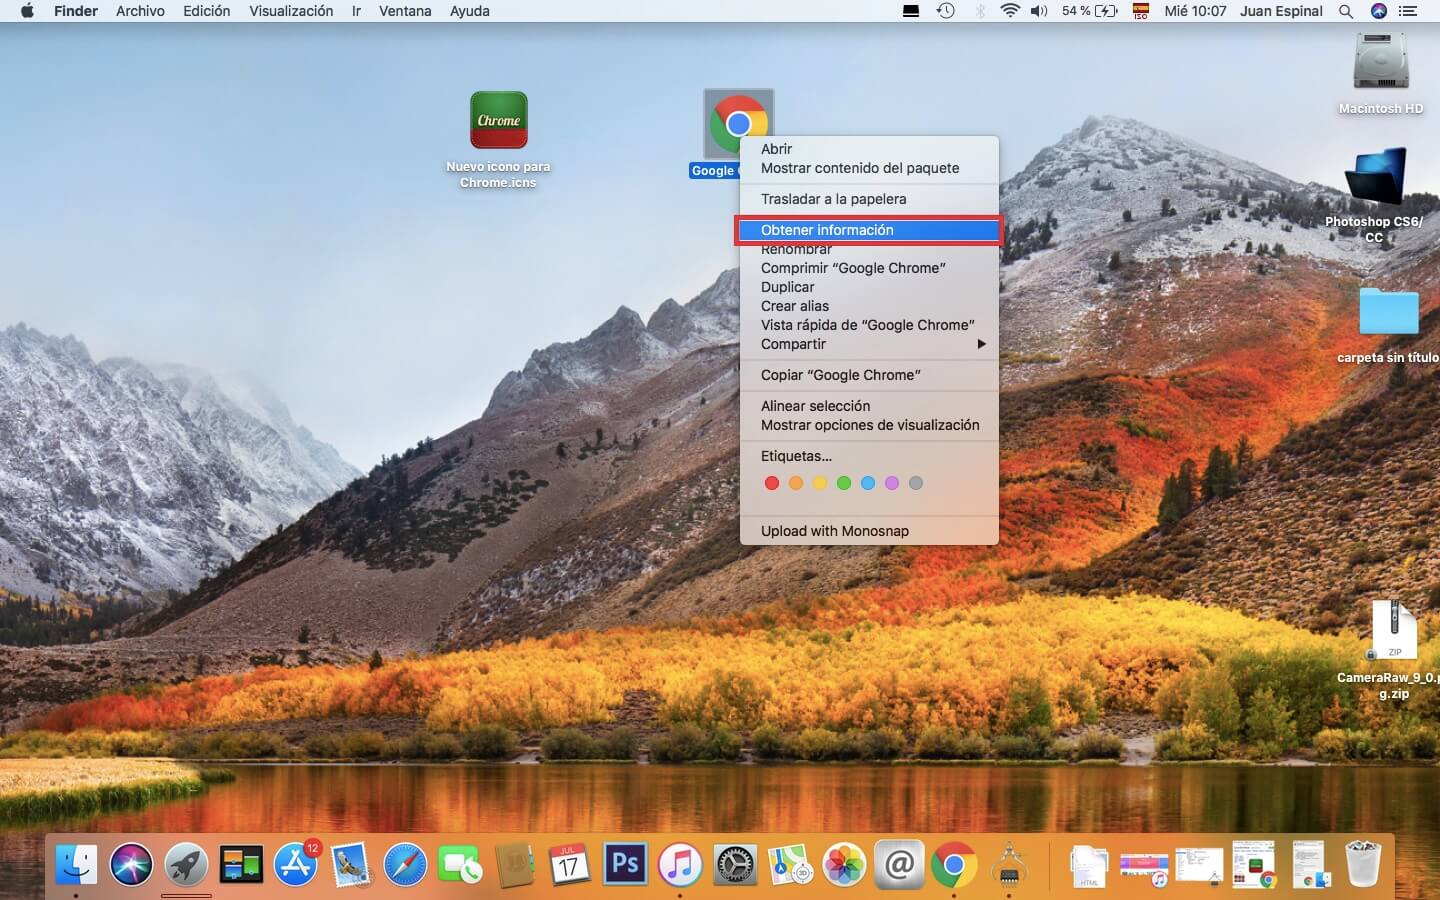 change the images of macOS icons